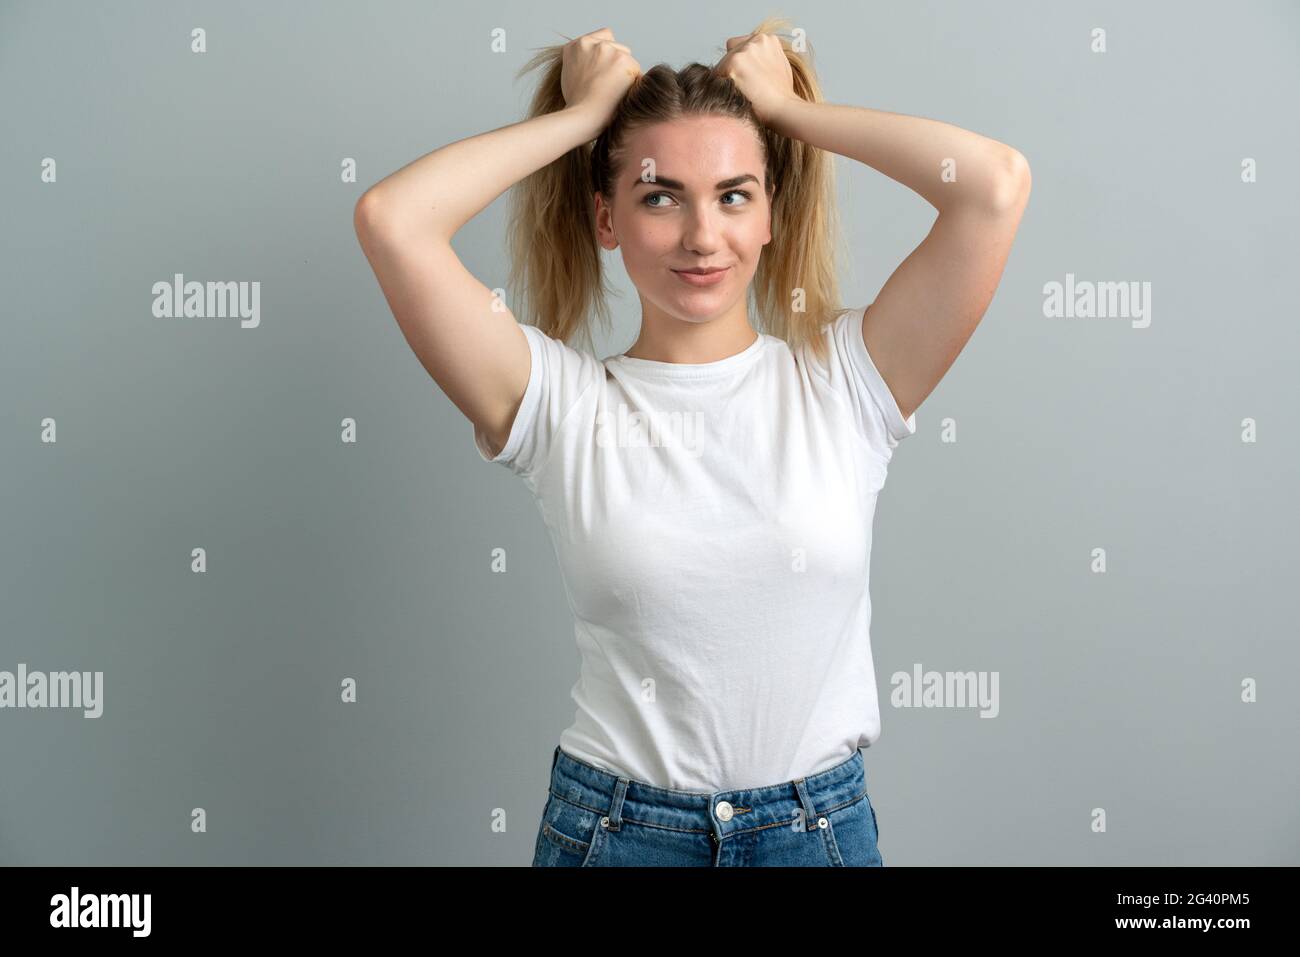 Funny playful young woman hold her blonde hair into two ponytails. Posing on camera on gray background. Stock Photo